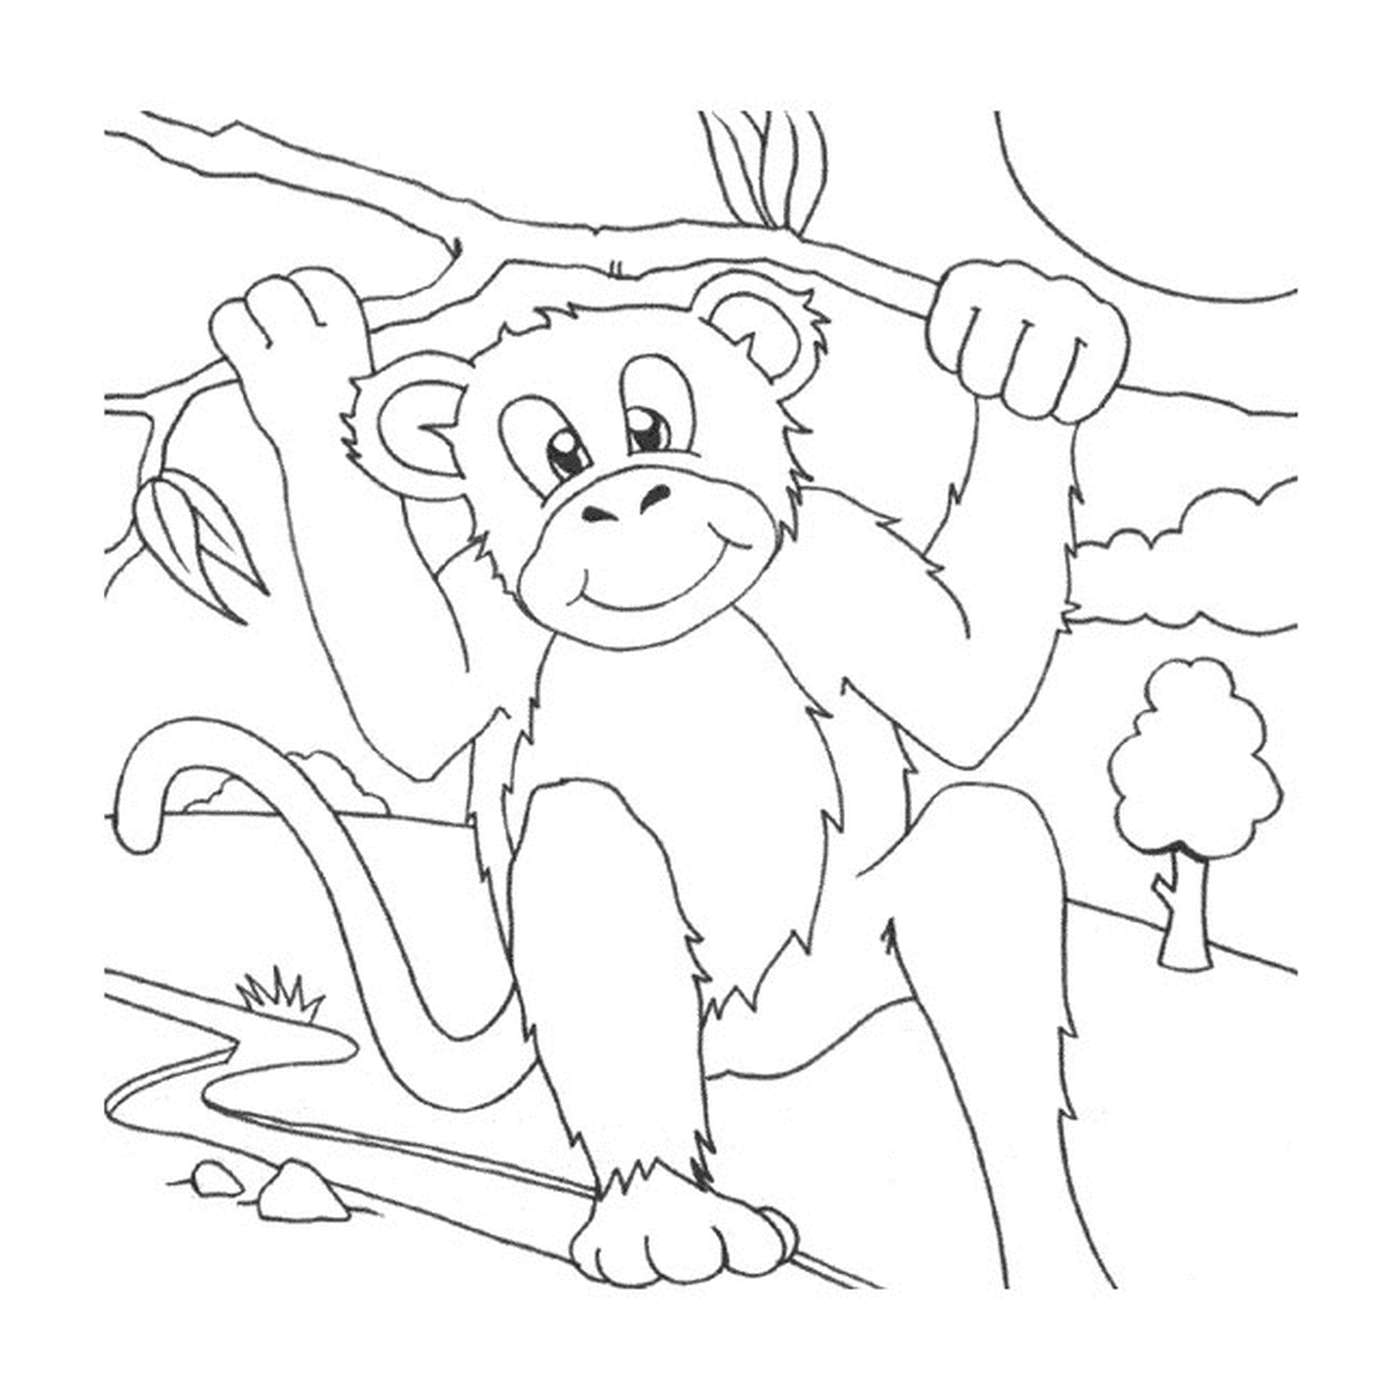  Monkey in the forest 